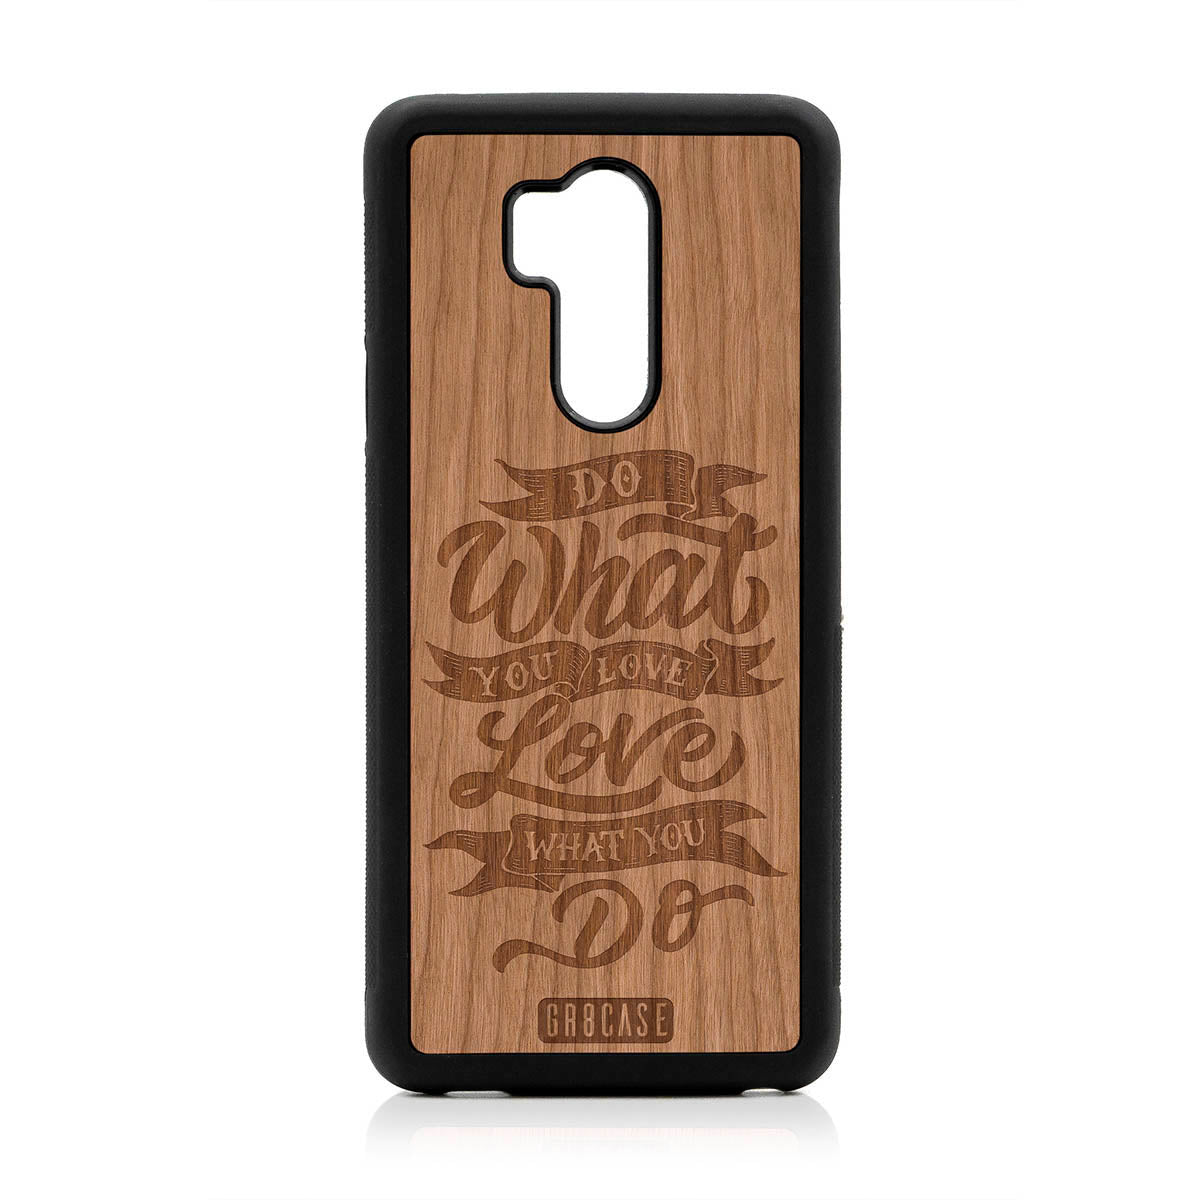 Do What You Love Love What You Do Design Wood Case For LG G7 ThinQ by GR8CASE